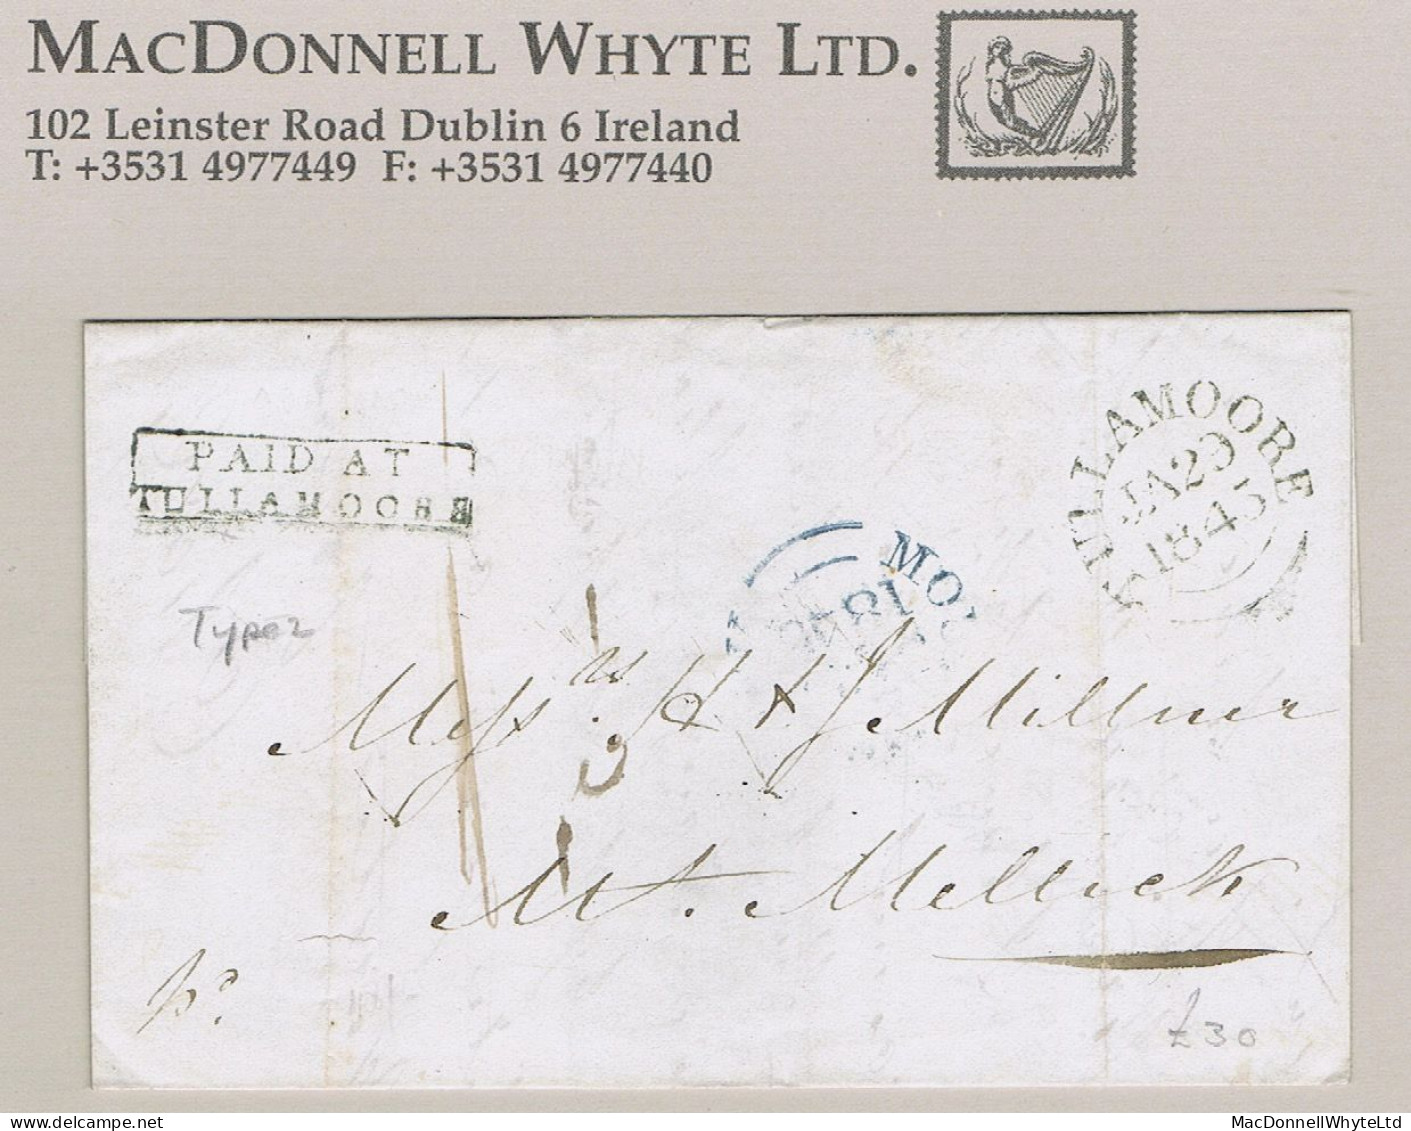 Ireland Offaly Uniform Penny Post 1845 Cover To Mountmellick With Boxed PAID AT/TULLAMOORE, TULLAMOORE JA 29 1845 - Vorphilatelie